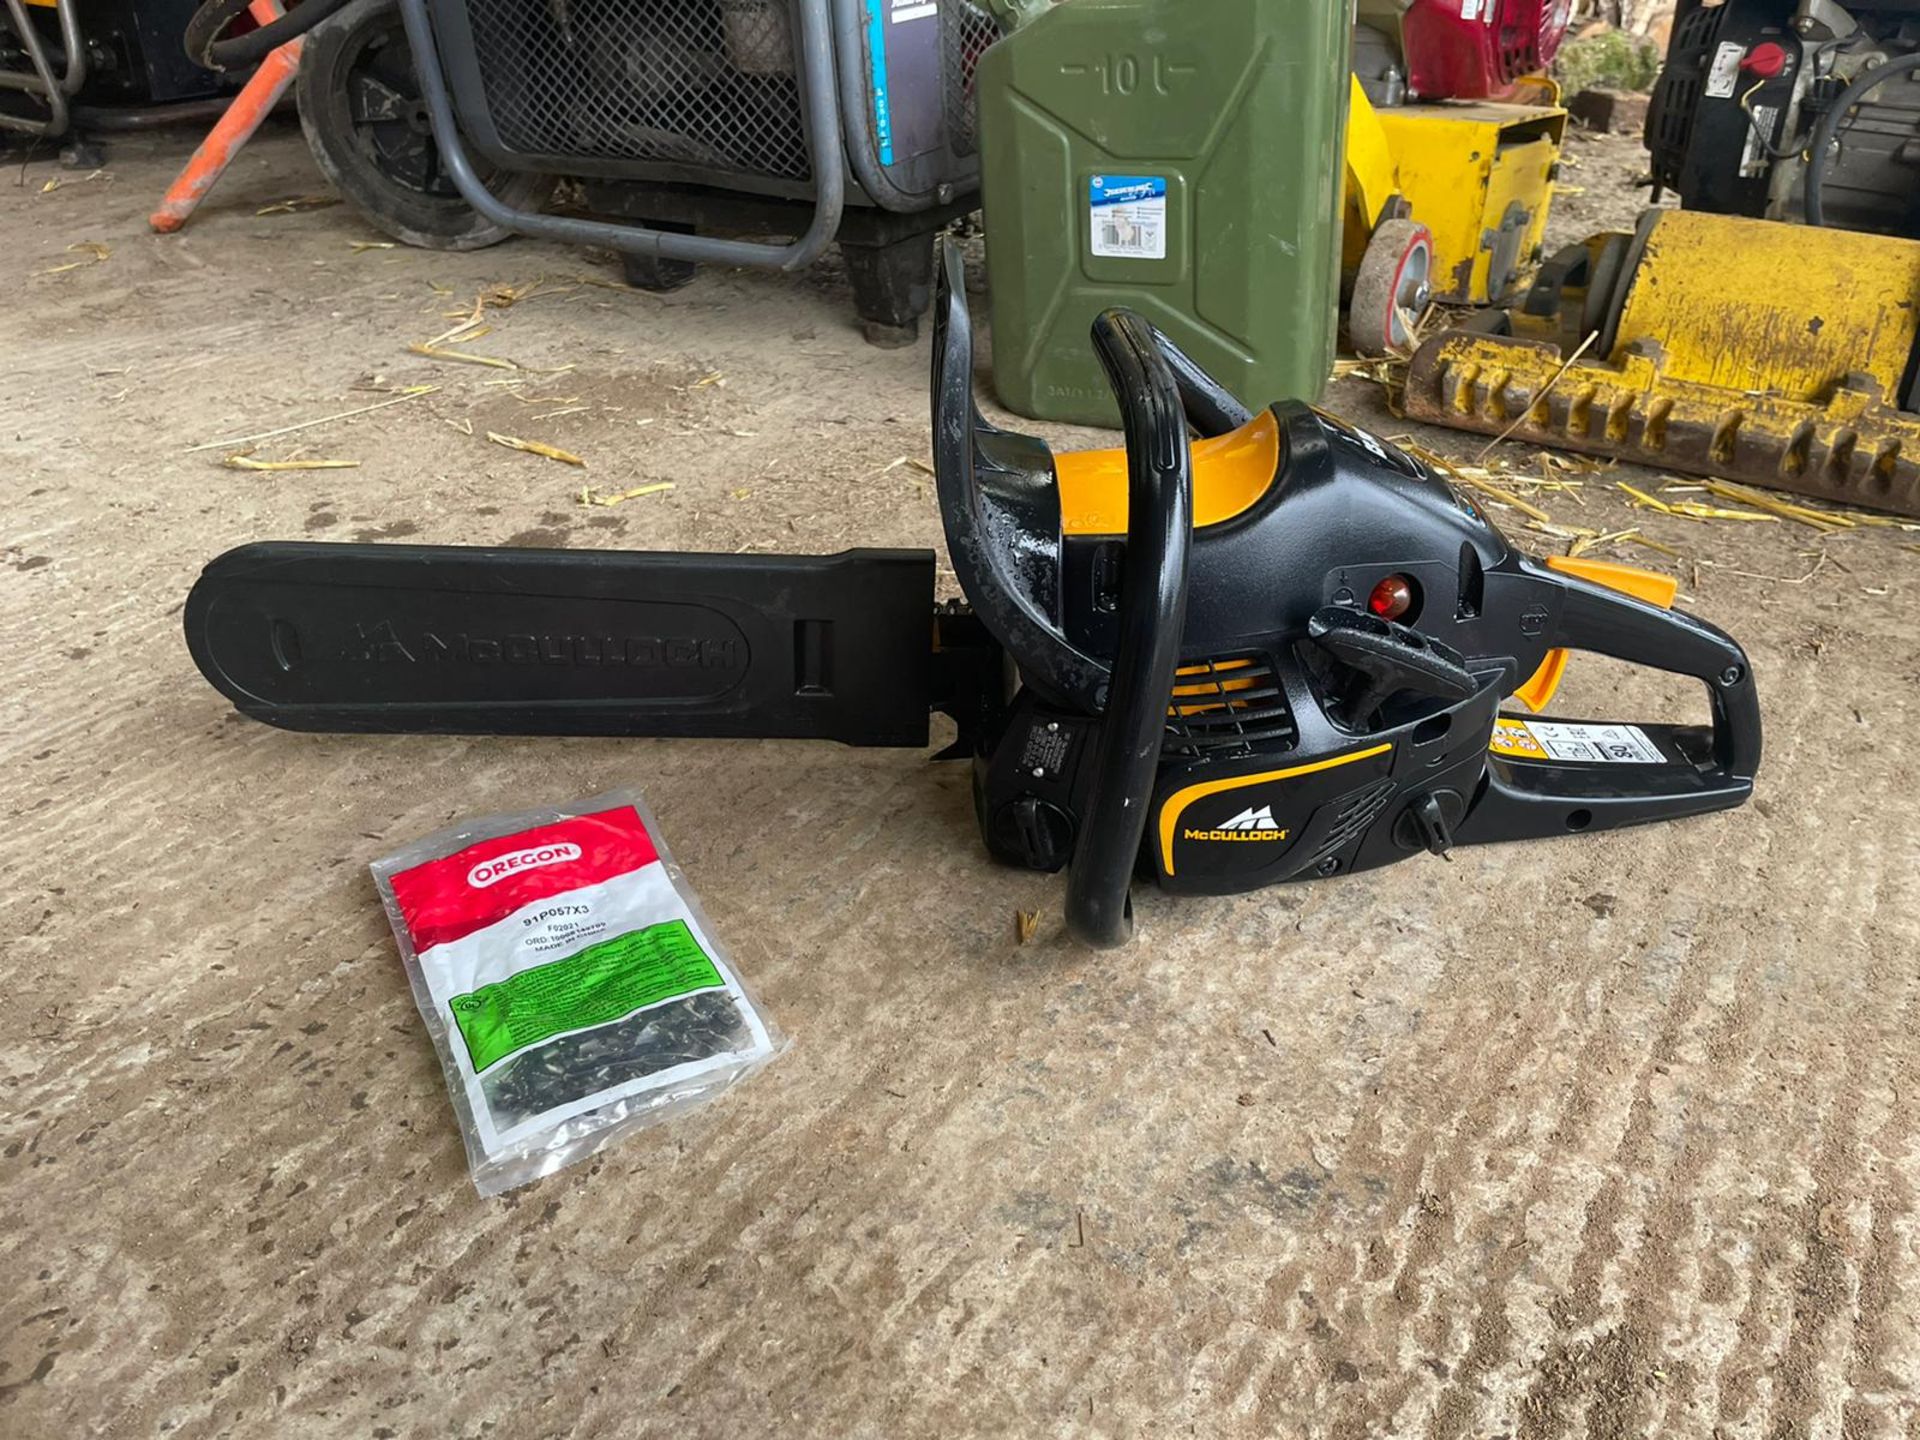 2018 McCULLOCH CS340 CHAINSAW, MADE BY HUSQVARNA, RUNS AND WORKS, 16" BAR AND CHAIN *NO VAT*